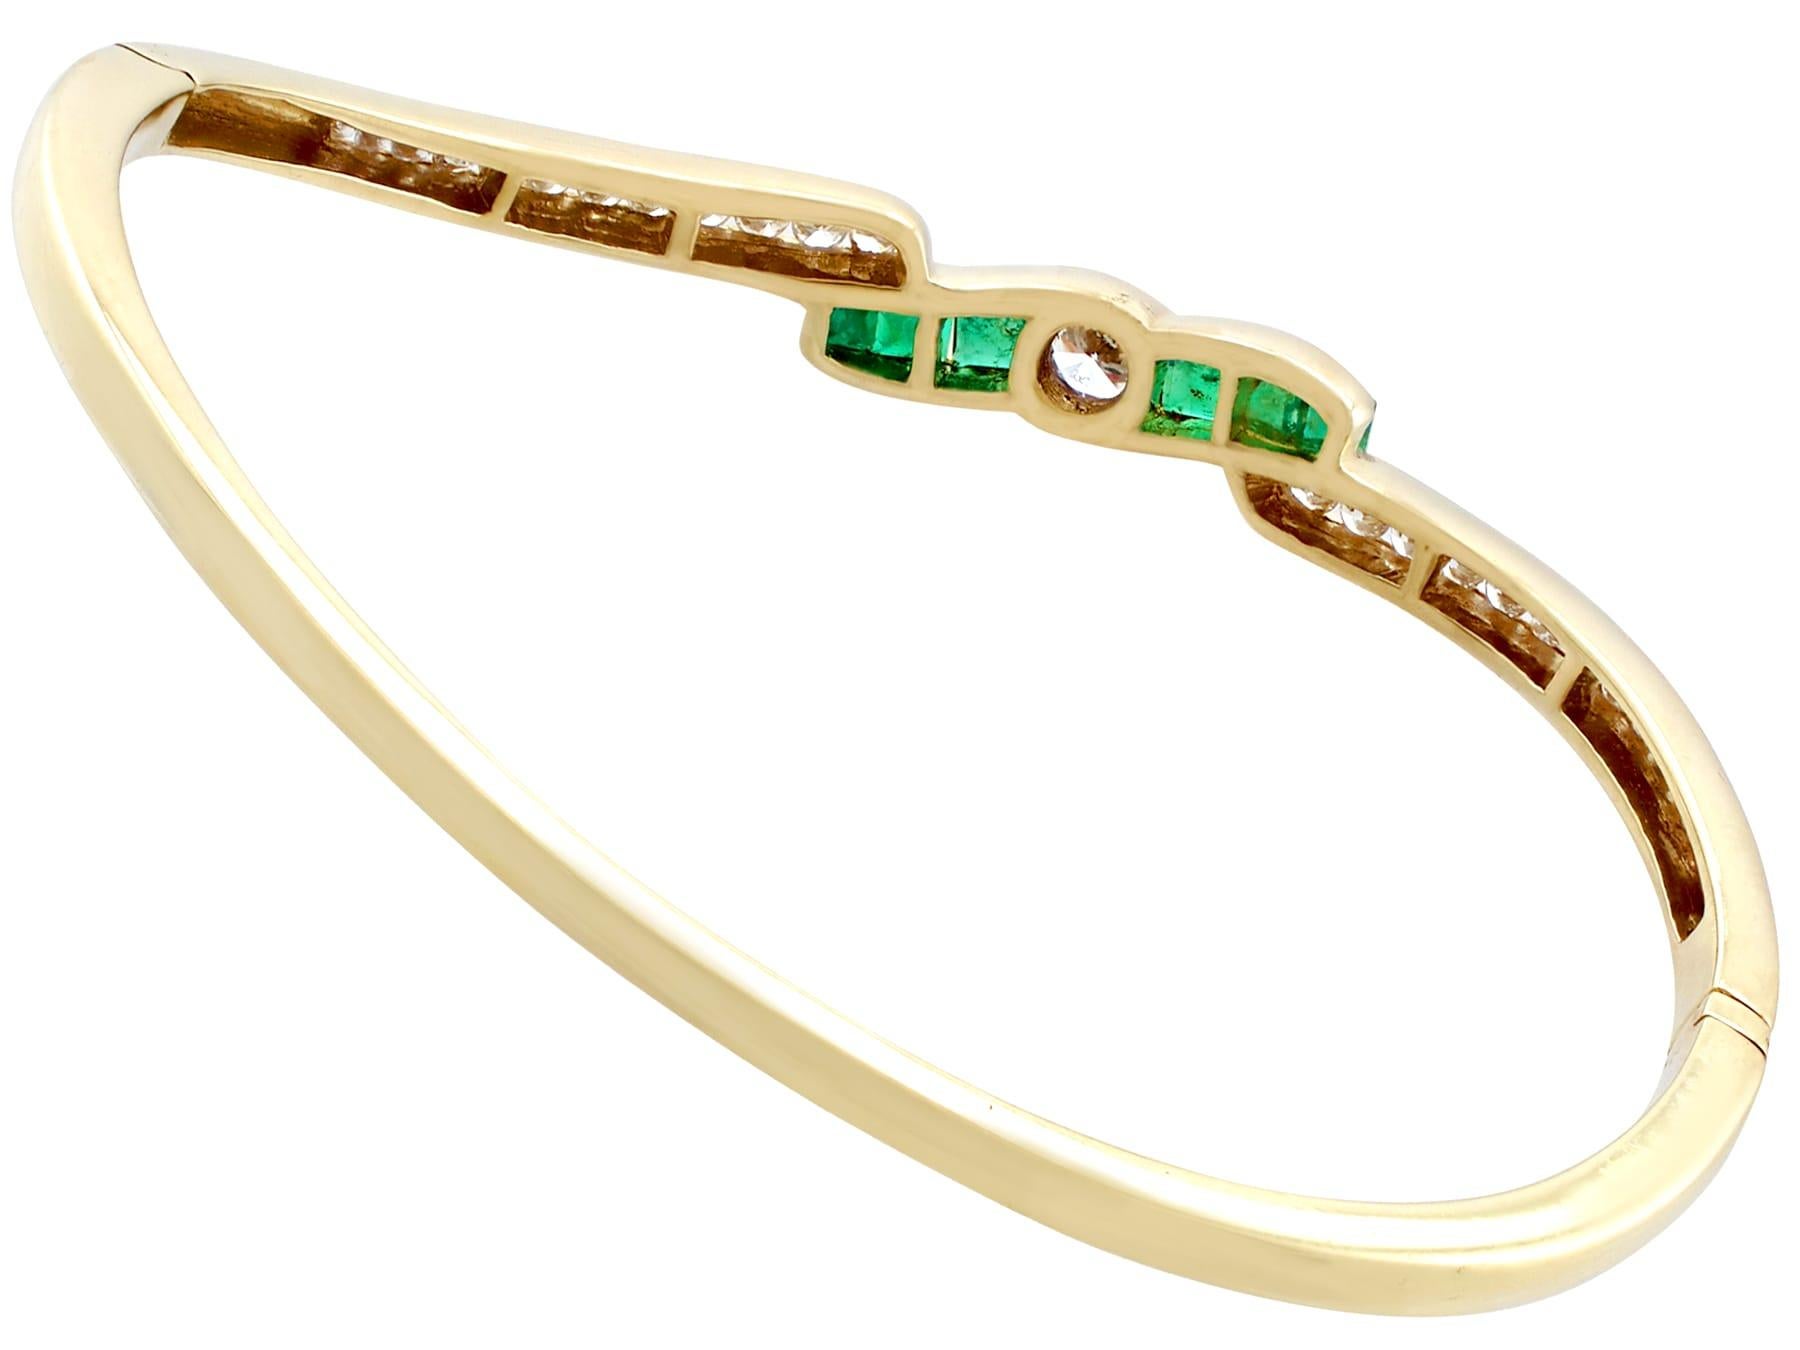 1.50 Carat Emerald and 1.36 Carat Diamond Bangle in 18K Yellow Gold In Excellent Condition For Sale In Jesmond, Newcastle Upon Tyne